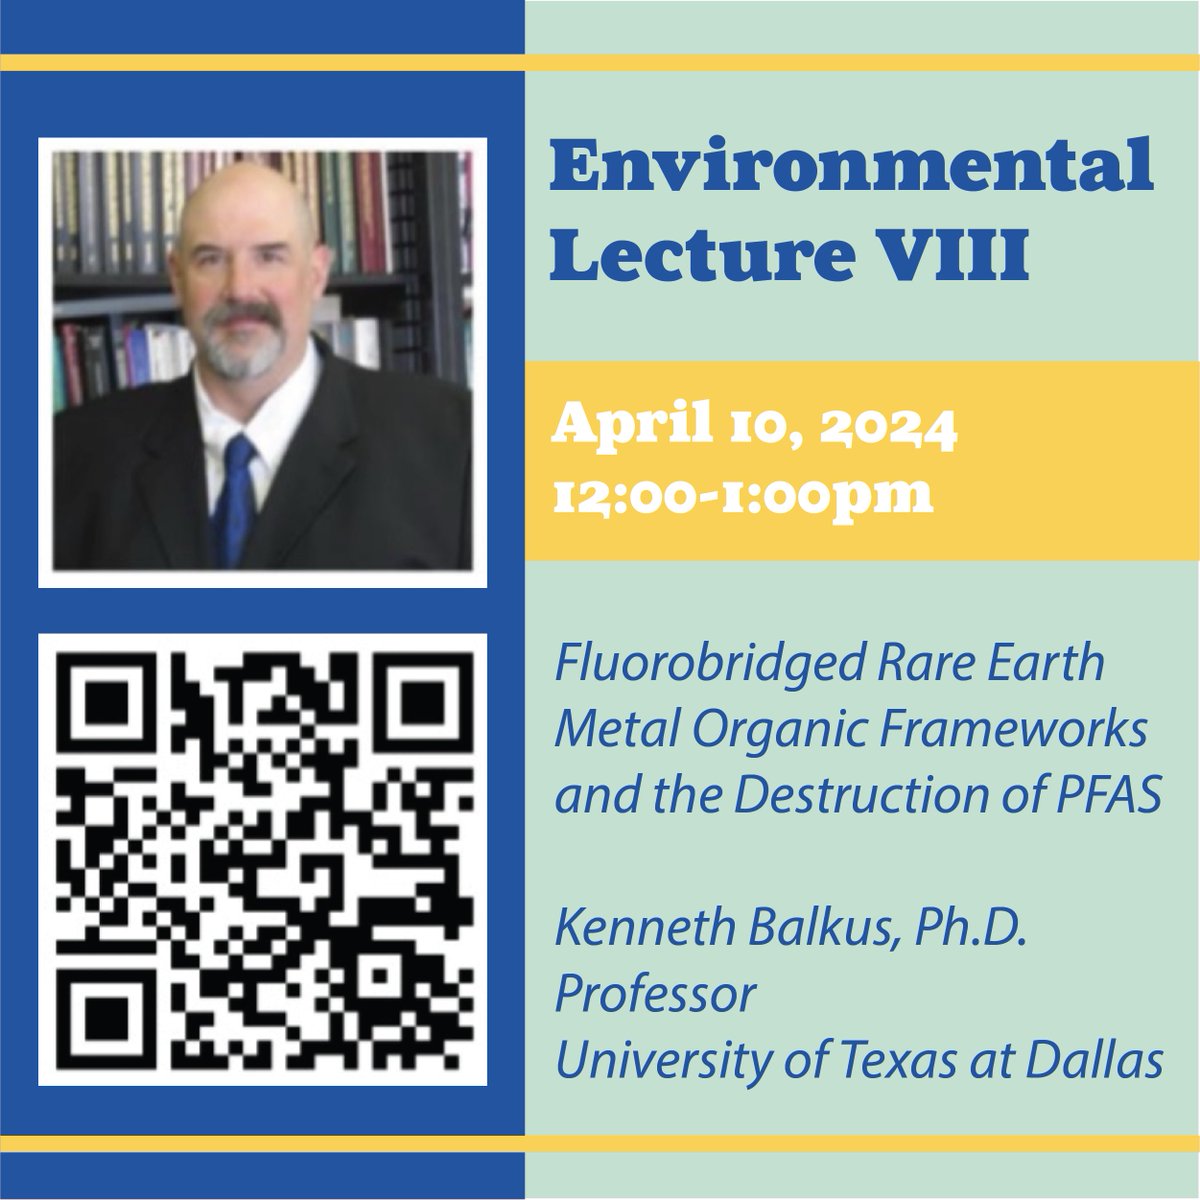 TOMORROW there will be a virtual green chemistry lecture given by Kenneth Balkus, Ph.D., a professor at the University of Texas at Dallas. Scan the QR code to join on Zoom!